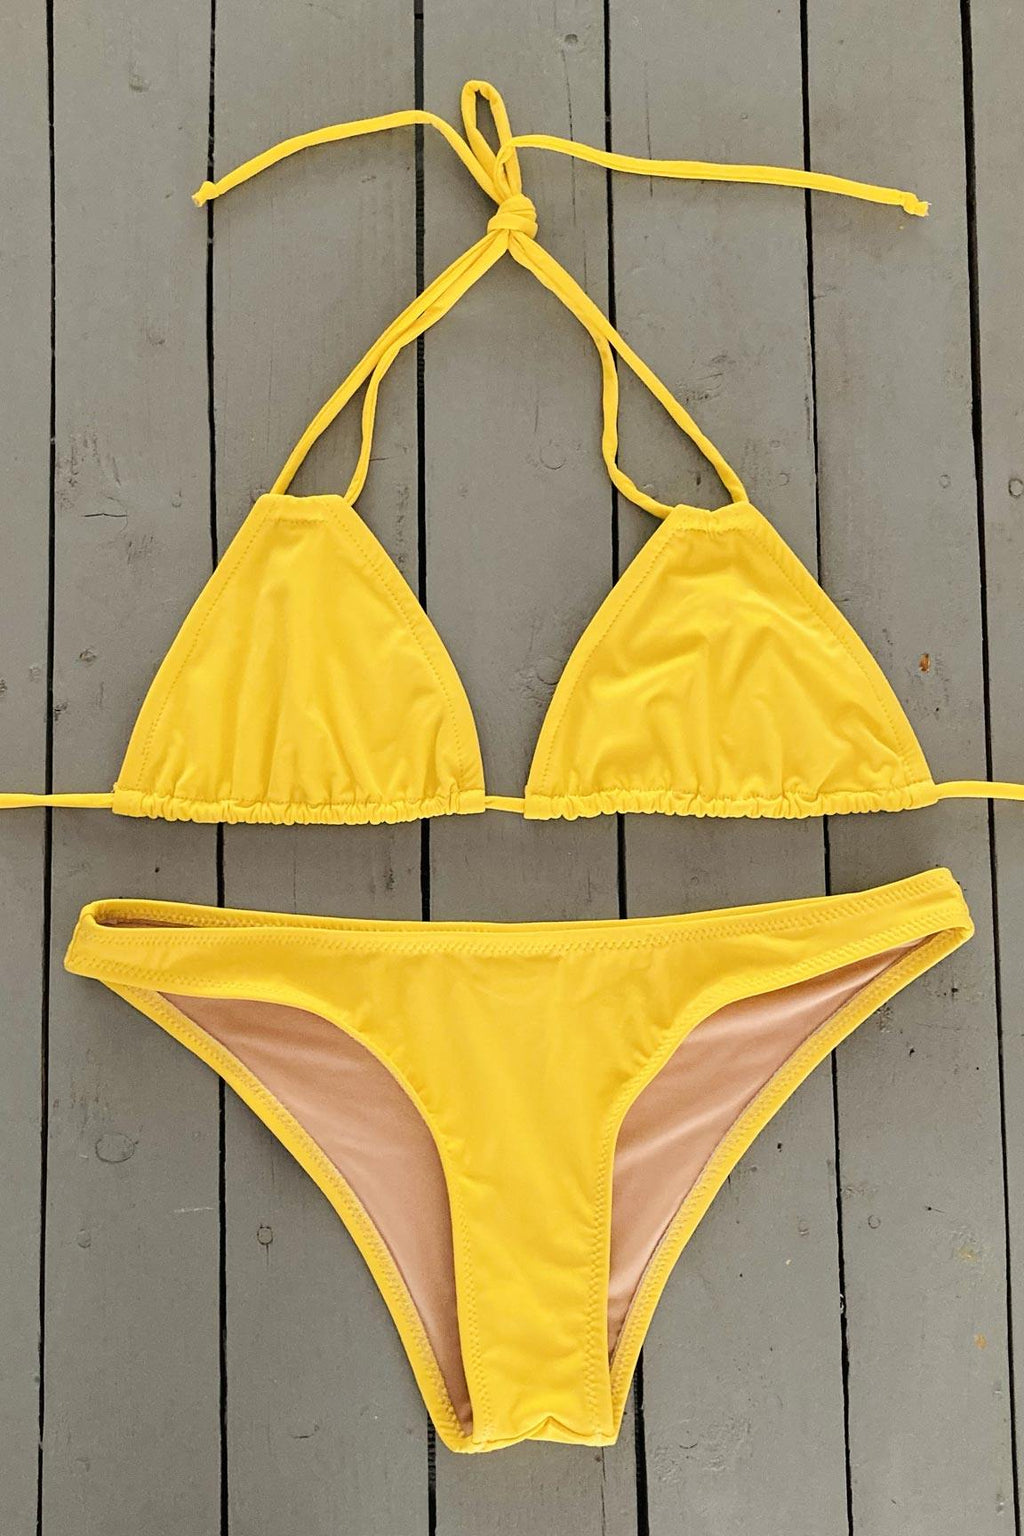 This sexy bright yellow, classic bottom bikini has a comfortable fit. Its made with the finest quality of soft and stretchy Lycra to achieve the best fit. Order yours today. @JillesBikinis